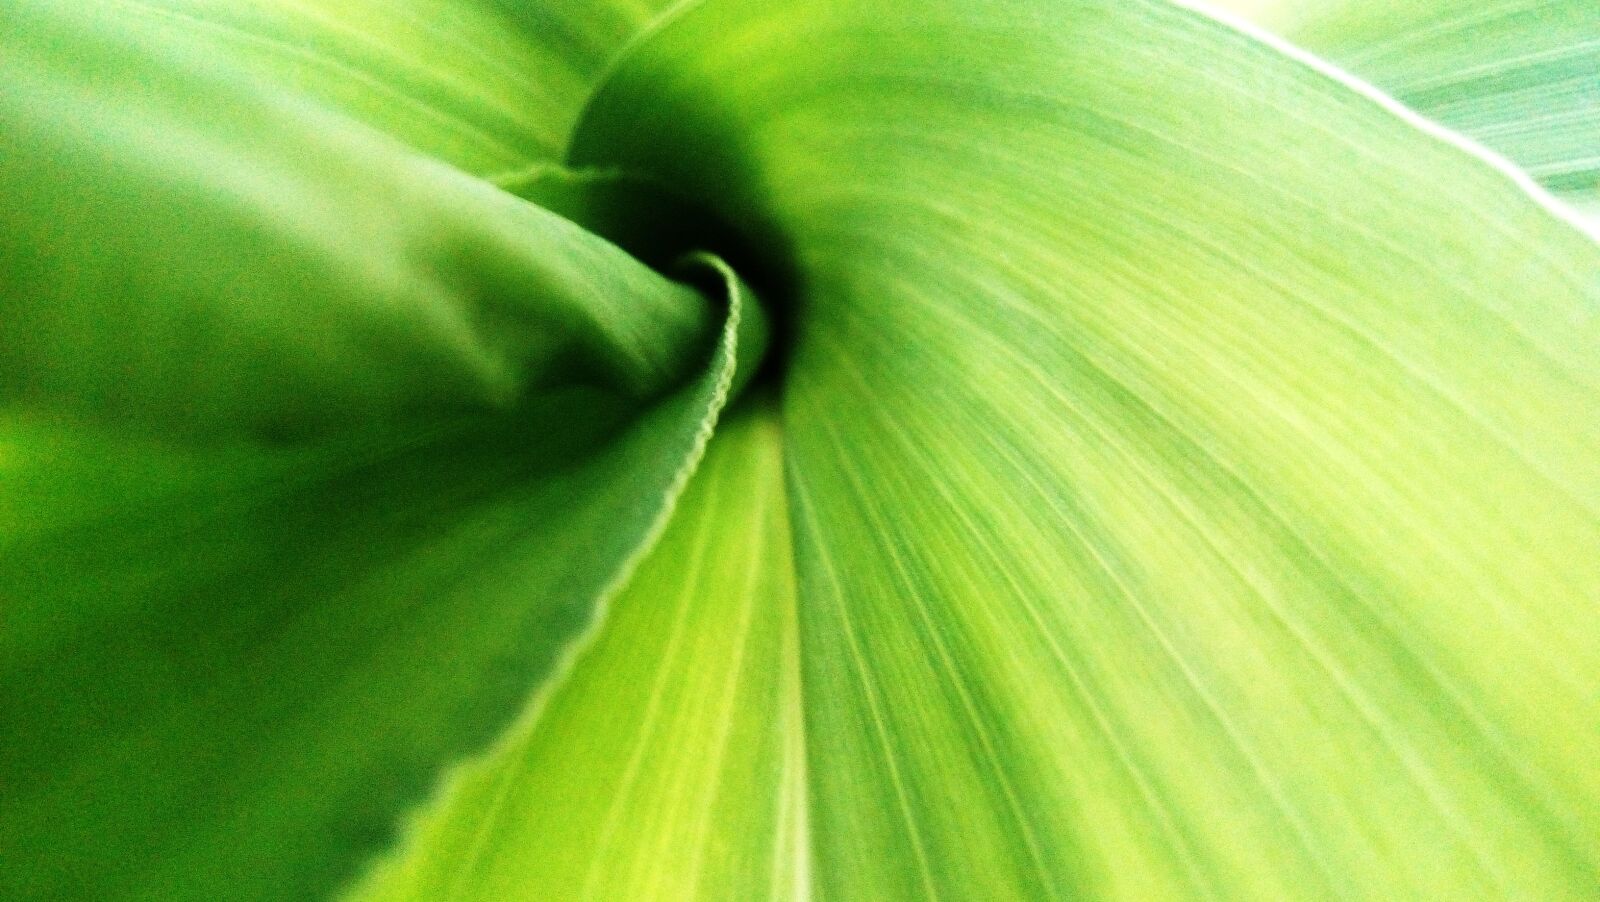 HUAWEI Y6 PRO sample photo. Plants, close up, pattern photography